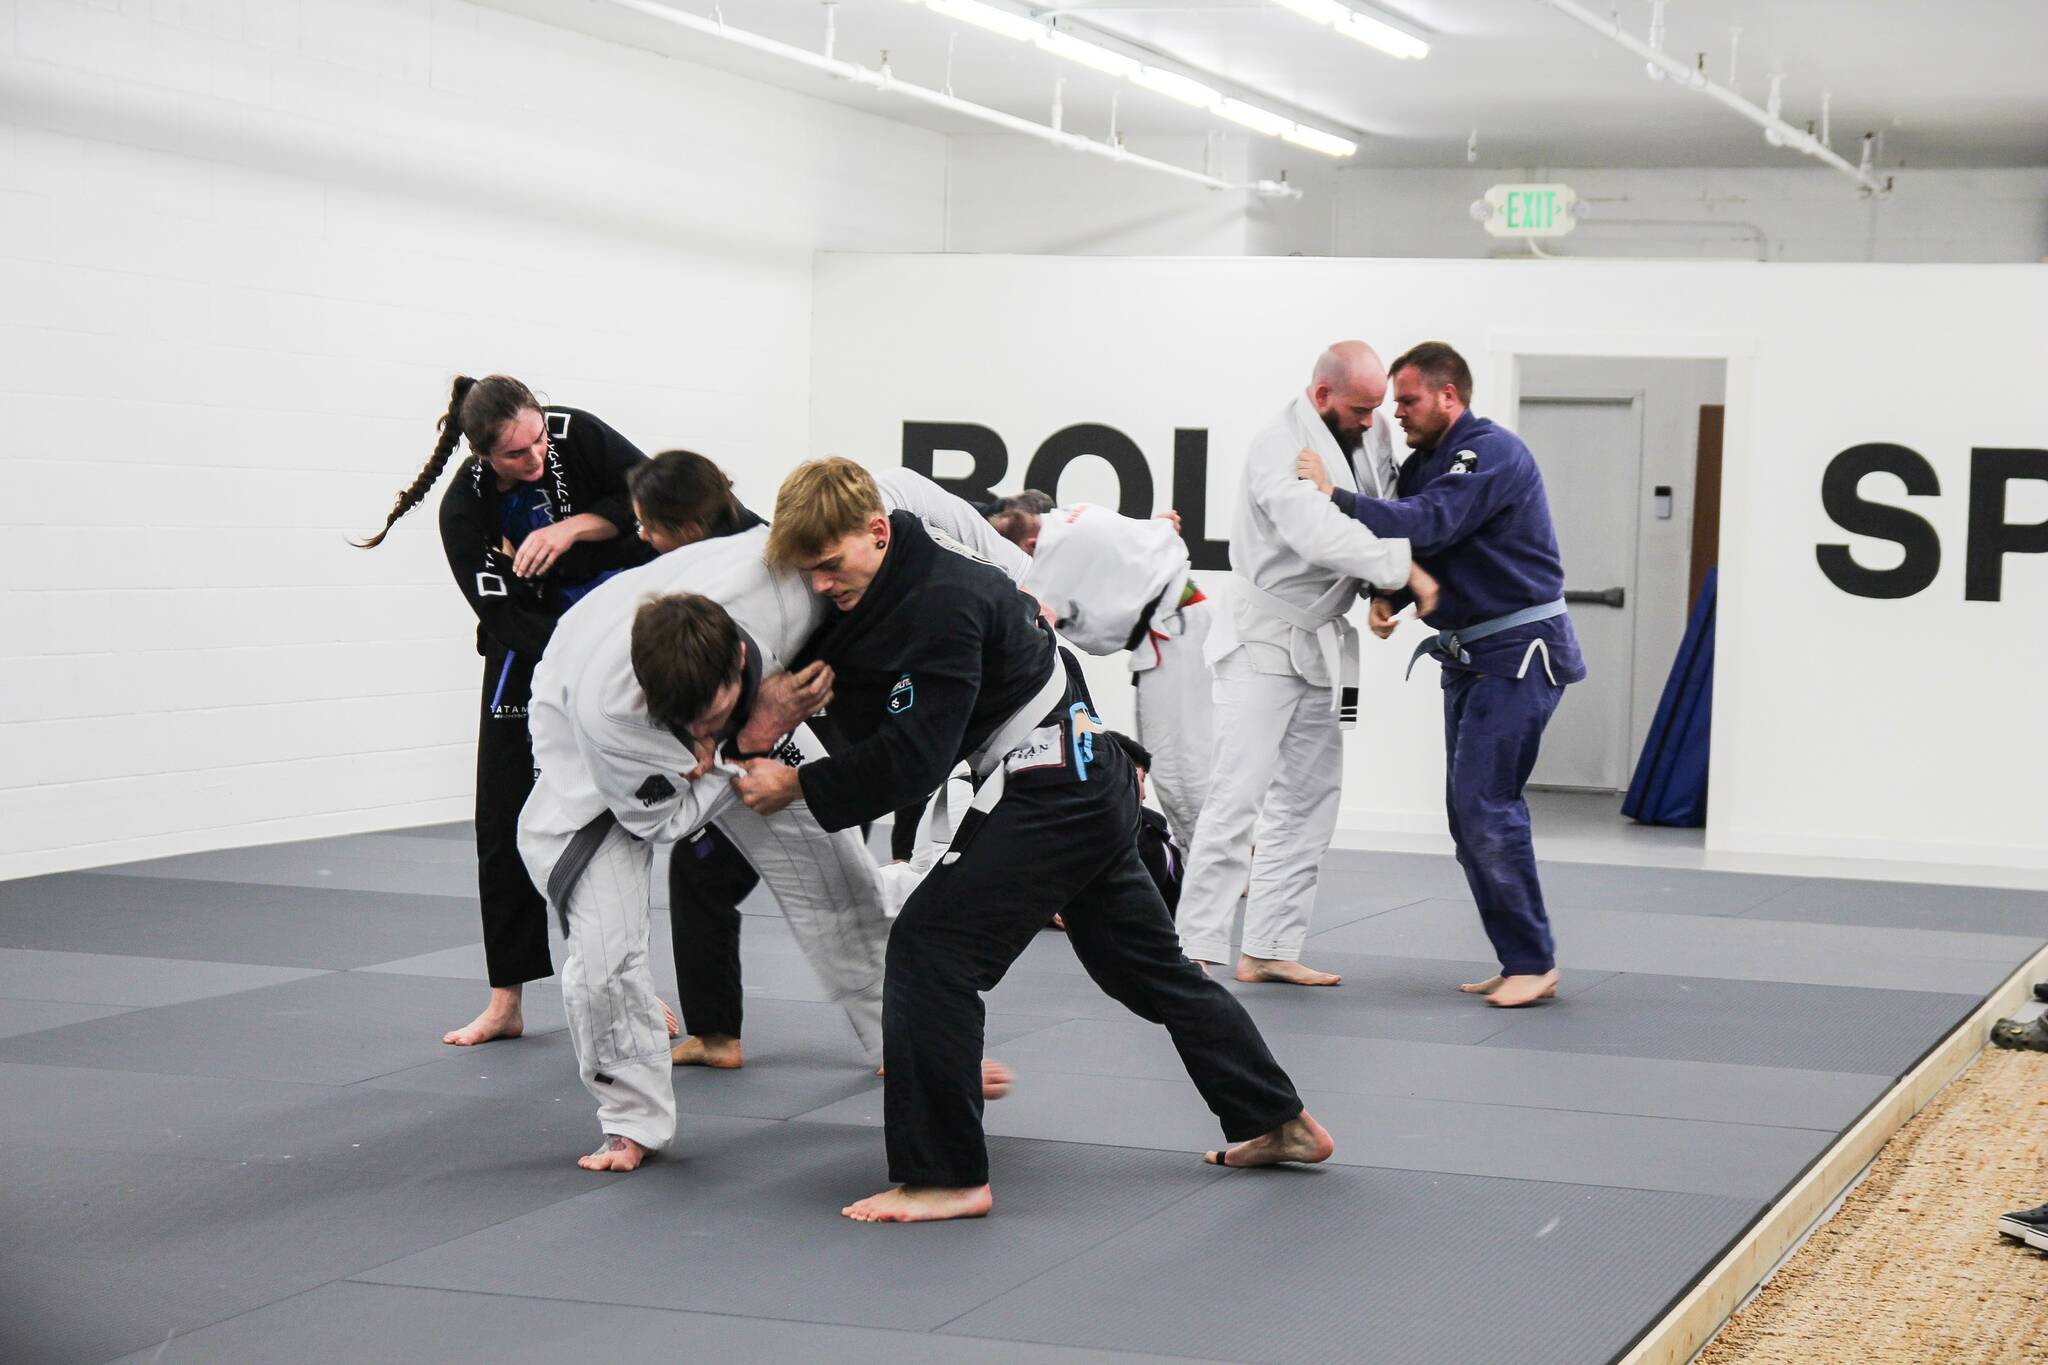 Athletes spar at Bold Spirit. Brazilian Jiu-Jitsu is a non-violent form of self-defense that consists of submitting one’s opponent with chokes and grappling techniques, without involving punching or kicking. (Photo by Luisa Loi)